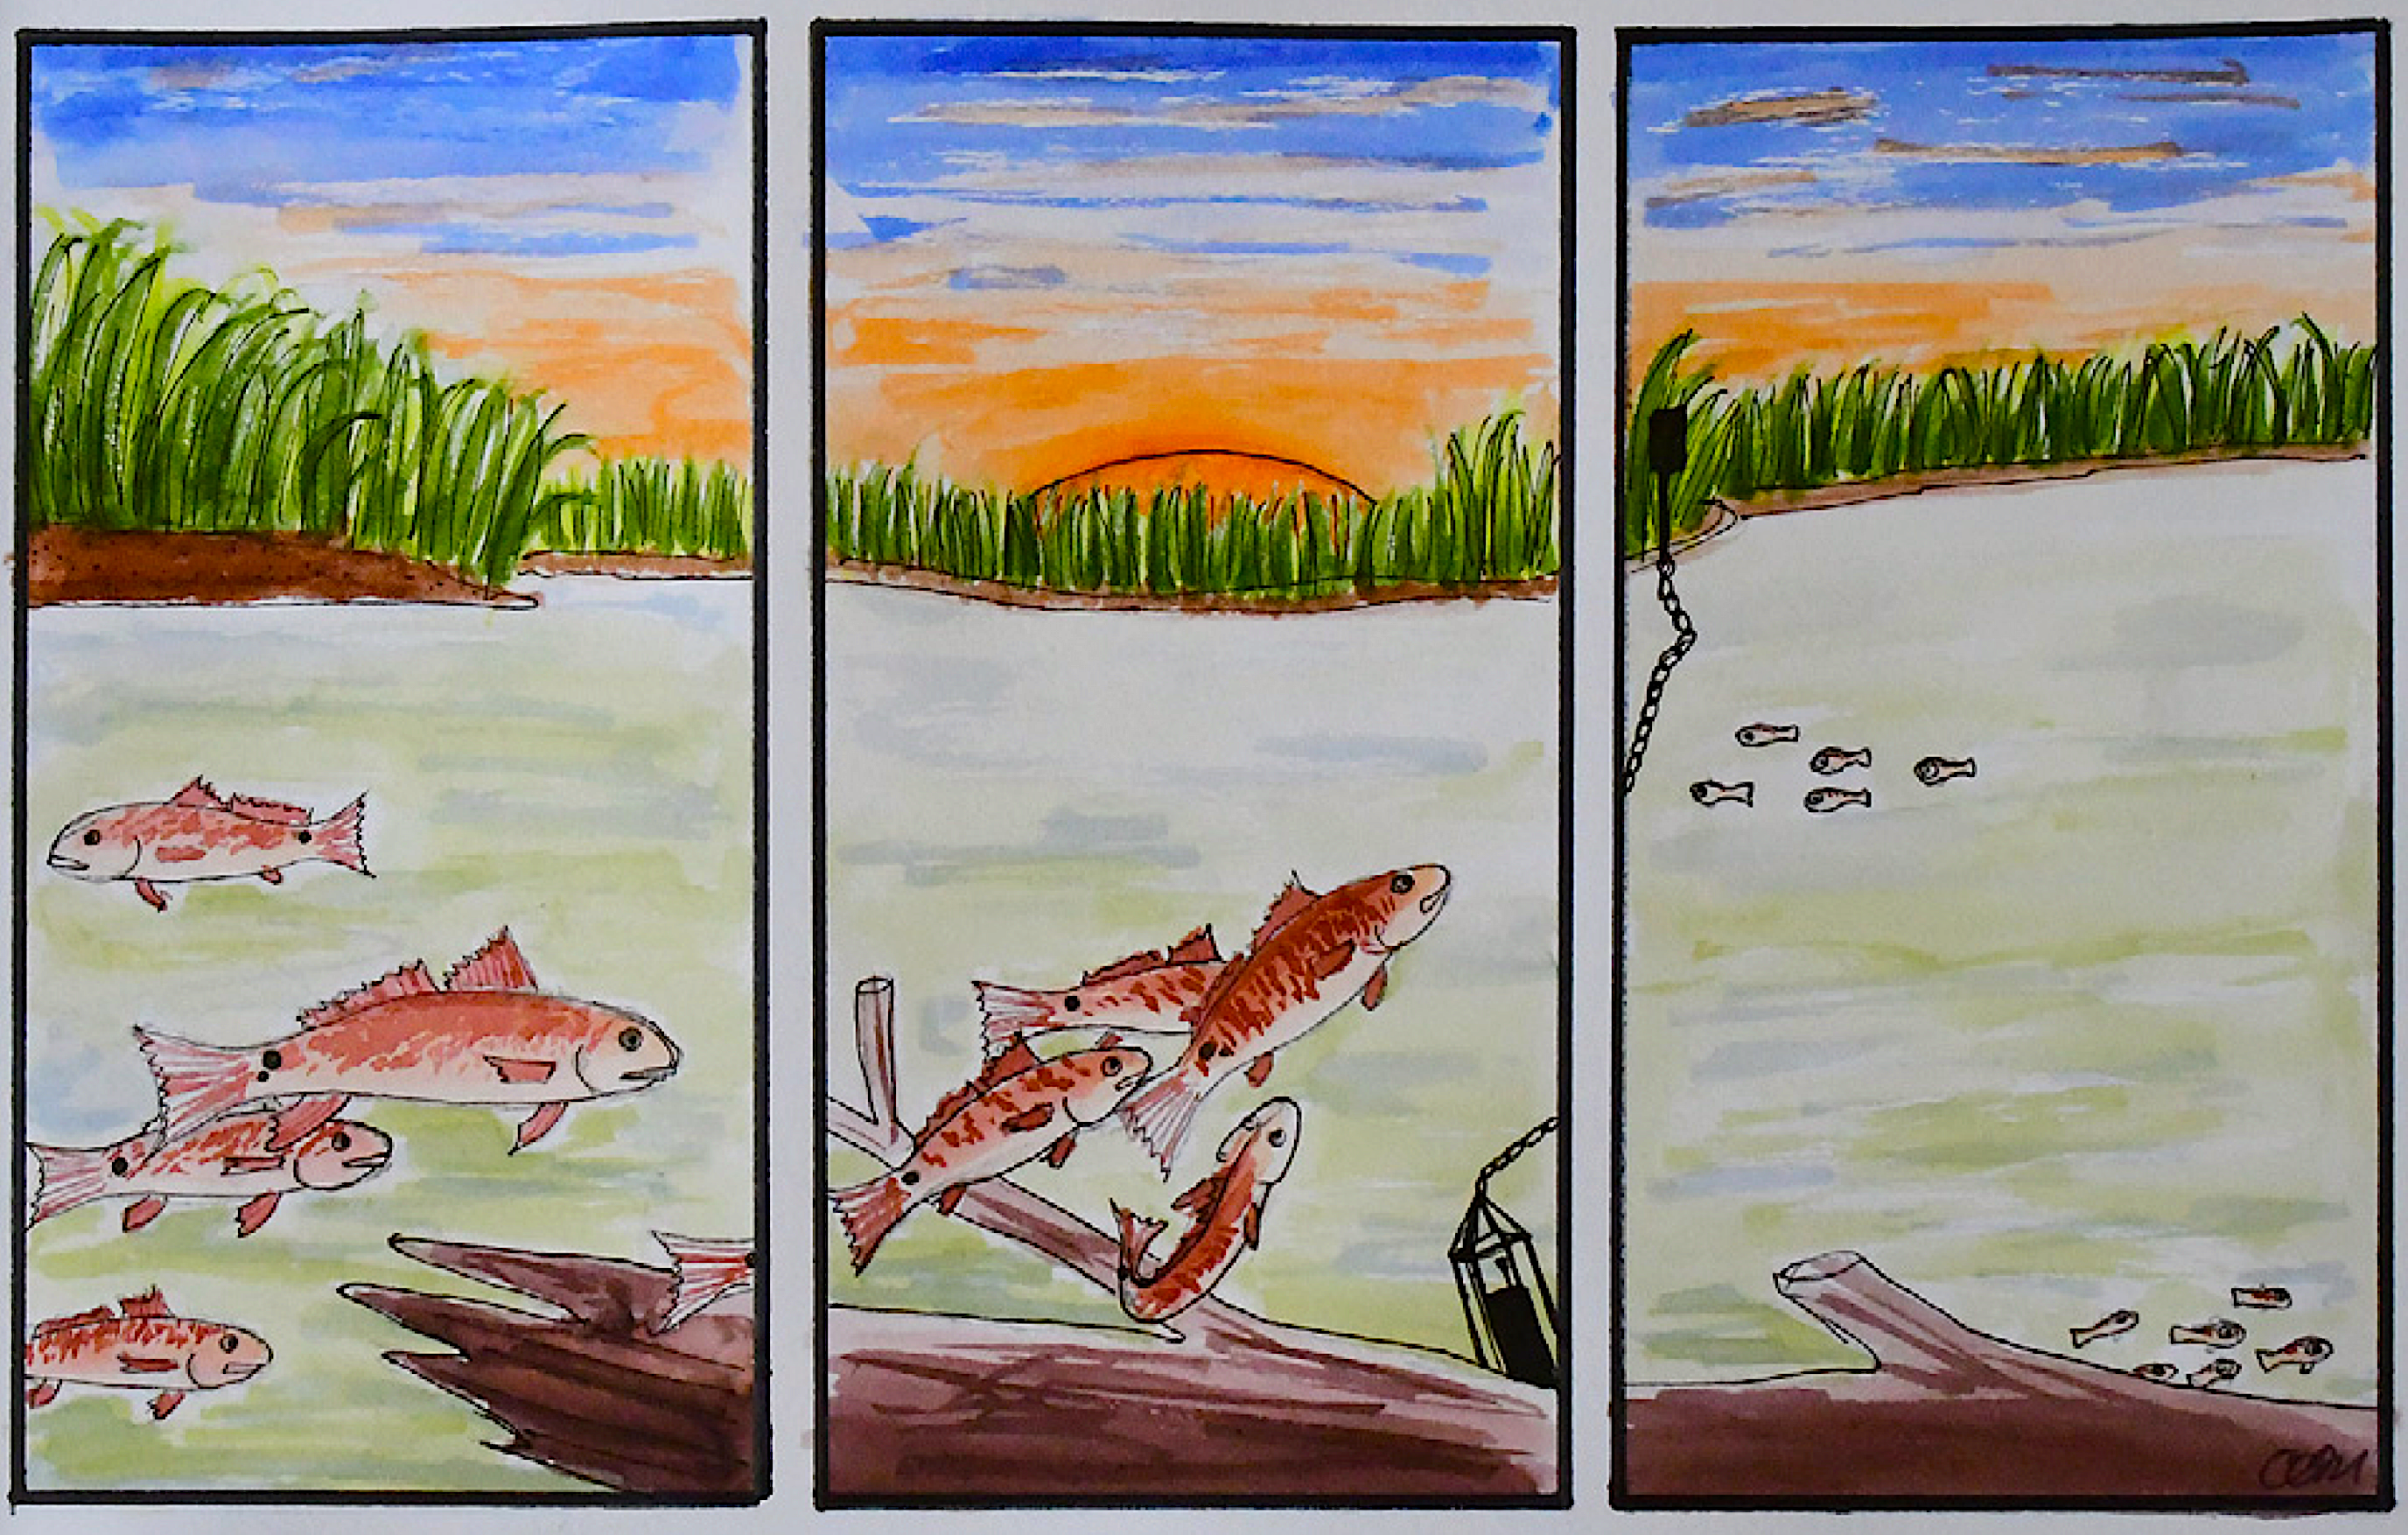 illustration: Passive acoustic recorders and seining were used to investigate long-term patterns of fish courtship sounds and their relationship to young-of-the-year appearance and abundance, credit: Claire Mueller.